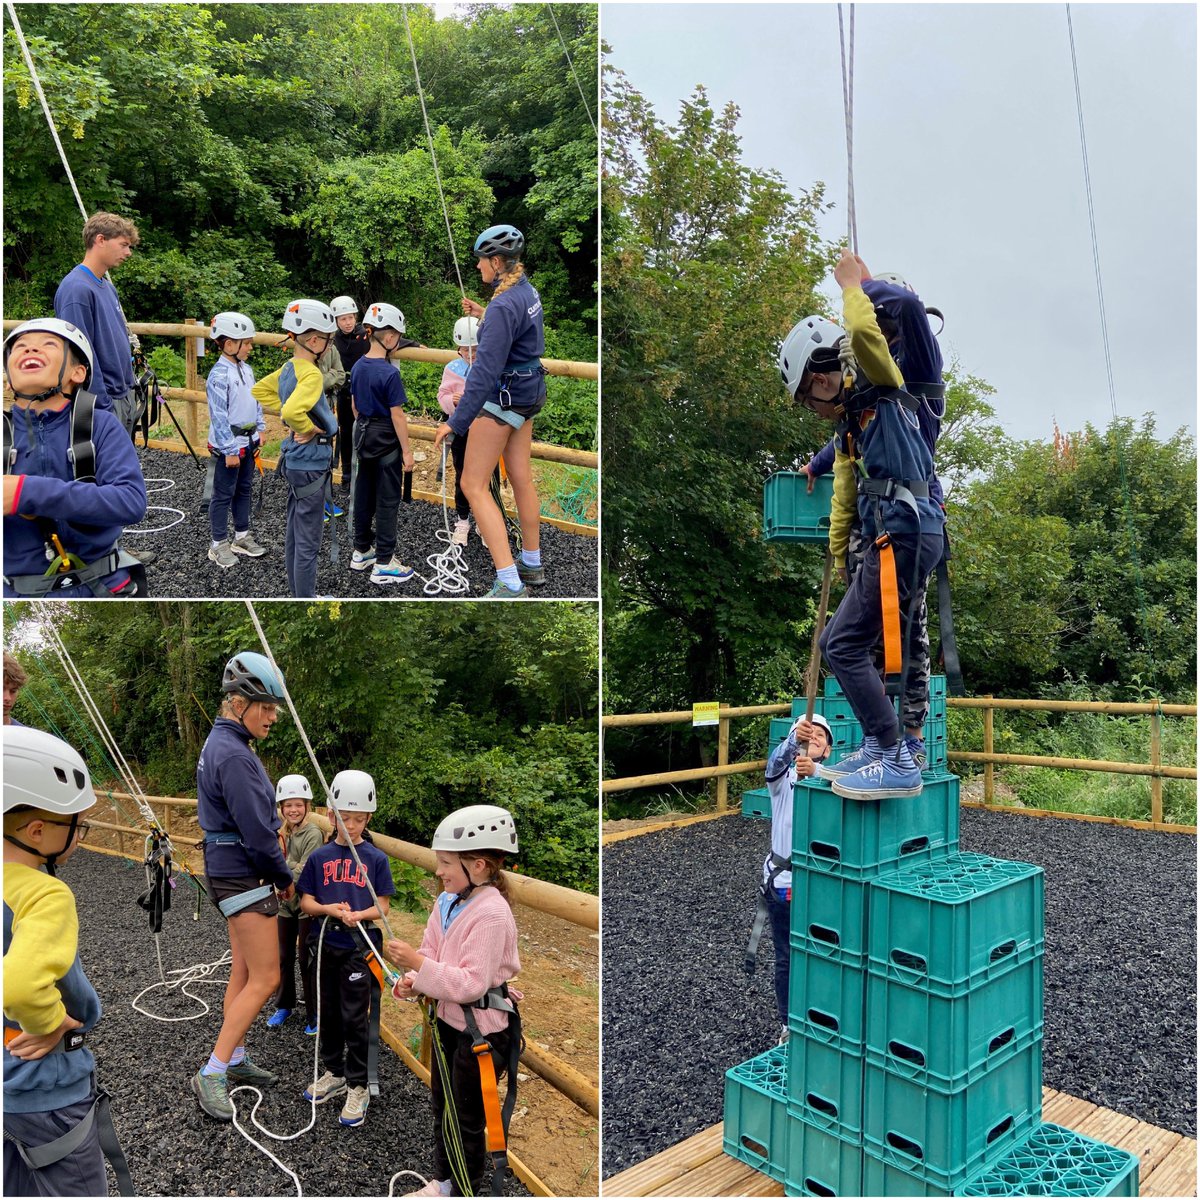 Year 5 Residential Update: The camp staff were impressed with how quickly the children settled last night. With rain through the night, we were all ready for a nice cooked breakfast this morning before driving into Swanage to have a go at the high ropes. #Year5Residential